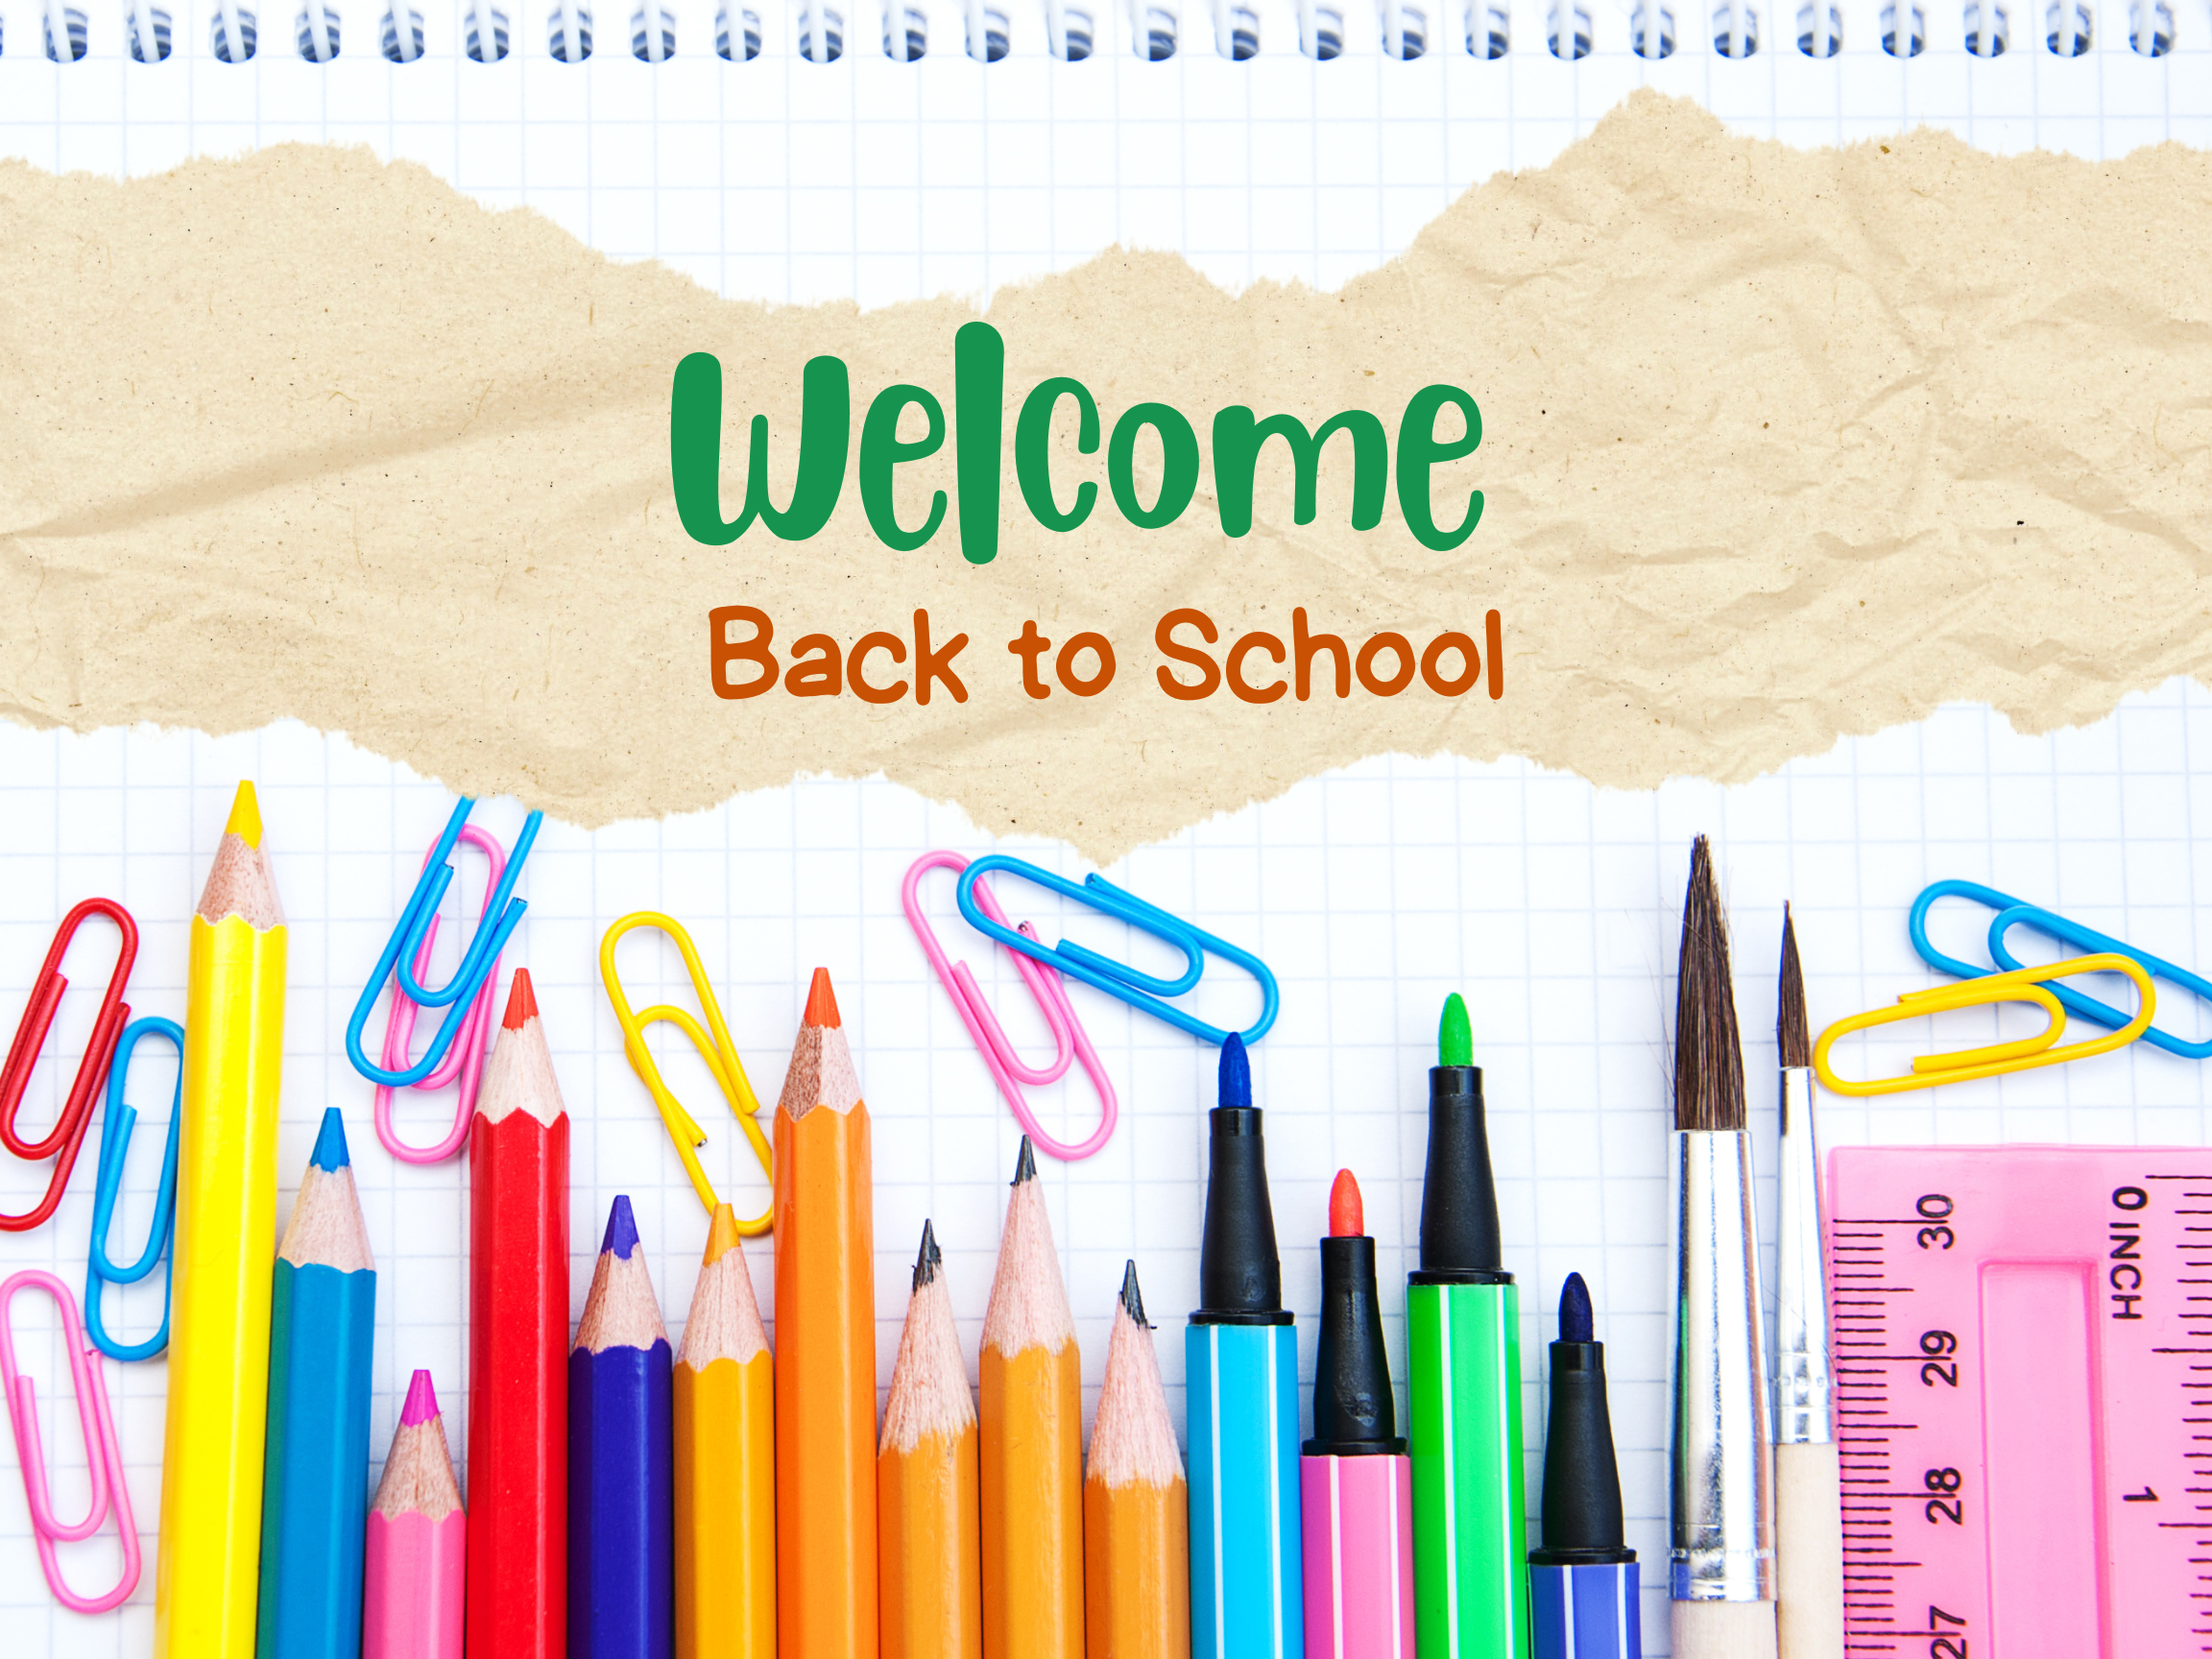 Back to school sales 2022 – best deals right now